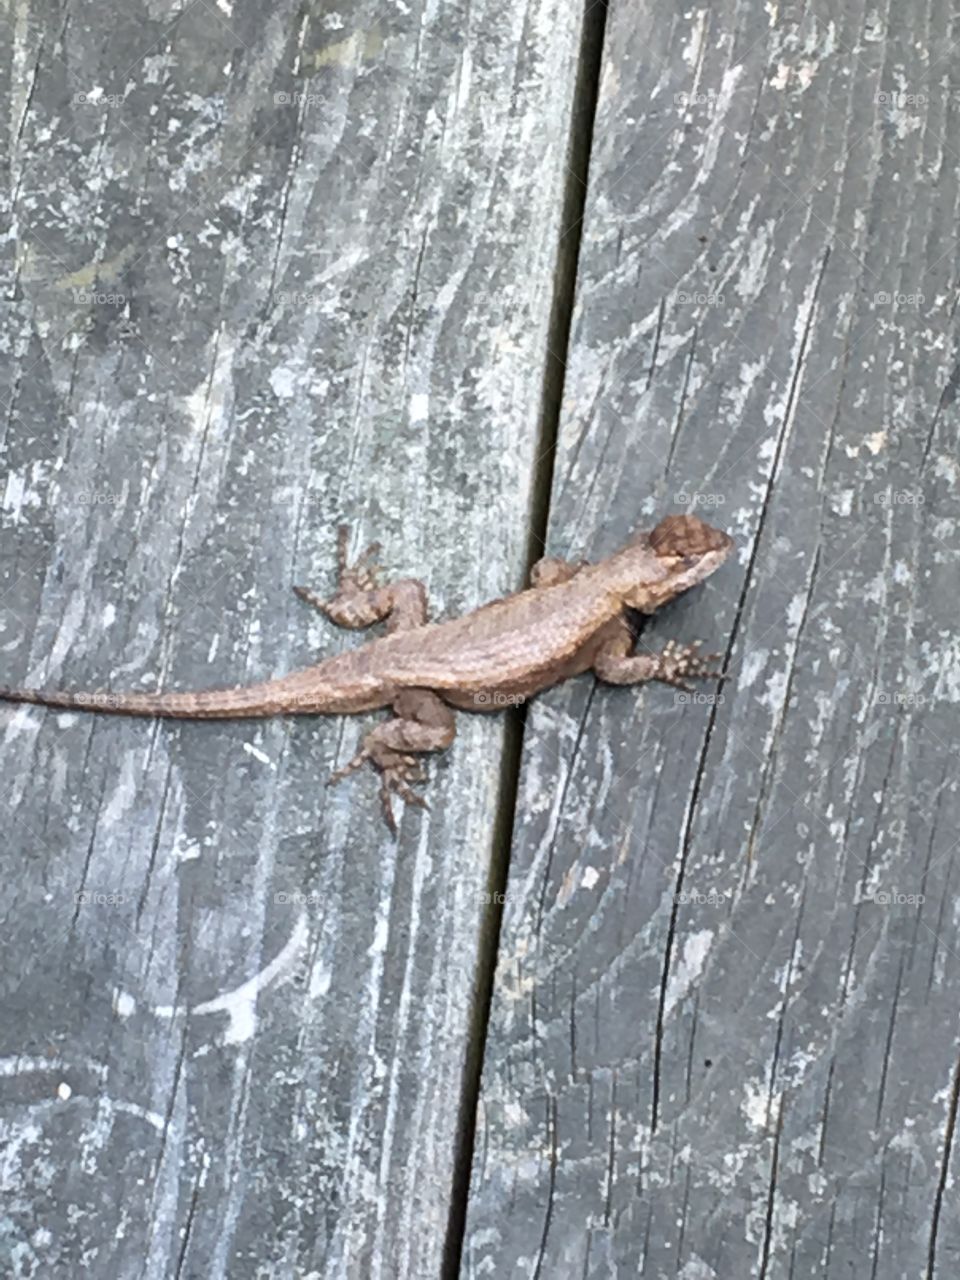 Lizard on the porch